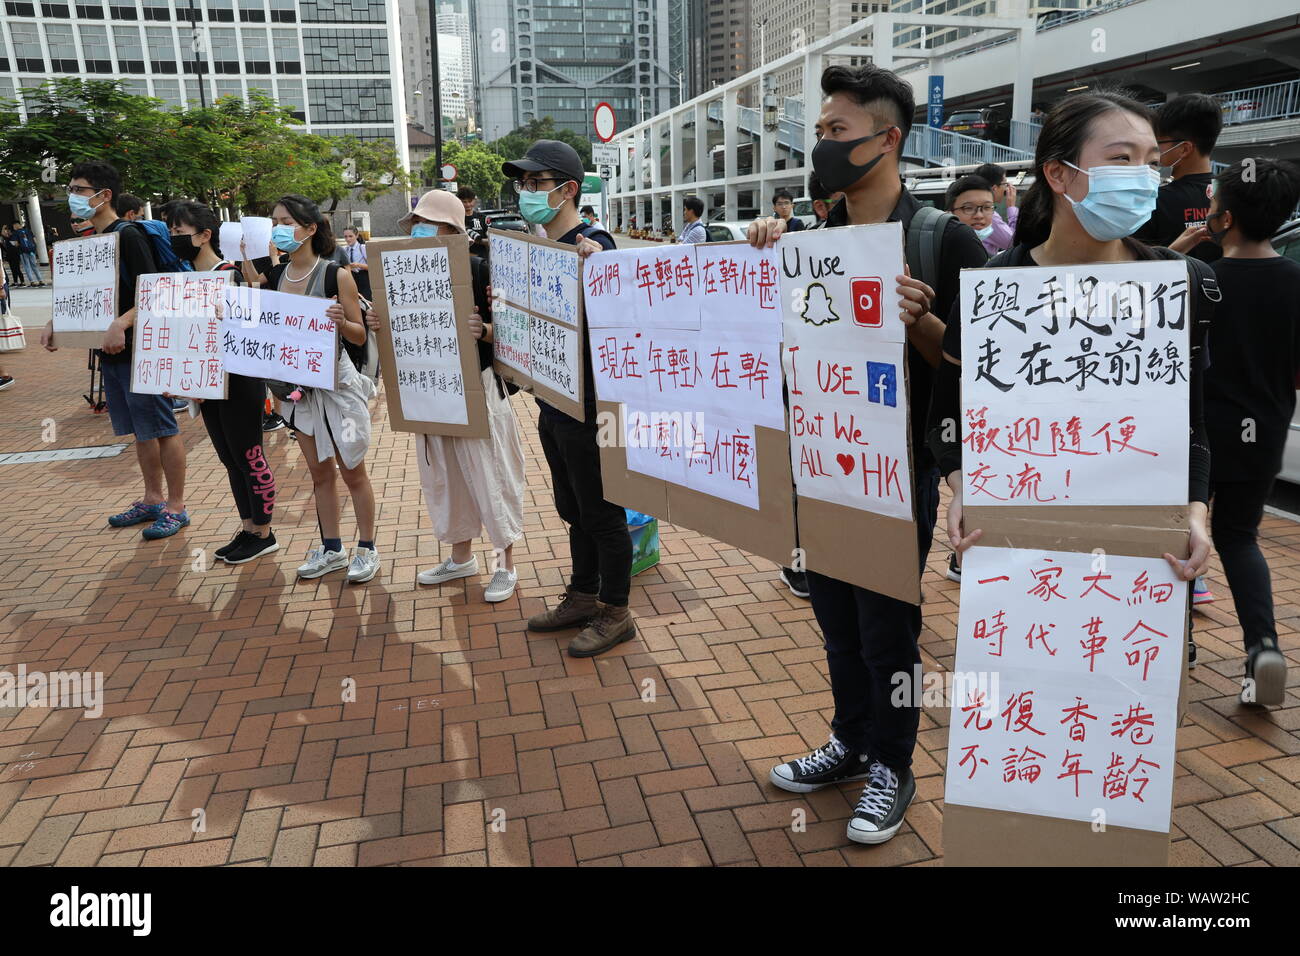 Hong Kong. 22nd Aug, 2019. 22nd August 2019. Hong Kong Secondary School Students Anti Extradition Bill protest in Central Hong Kong. Many hundreds of secondary school gathered for a rally in the blazing hot sun in support of Anti Extradition Bill protests which have been ongoing throughout Hong Kong for the past couple of months. Credit: David Coulson/Alamy Live News Stock Photo